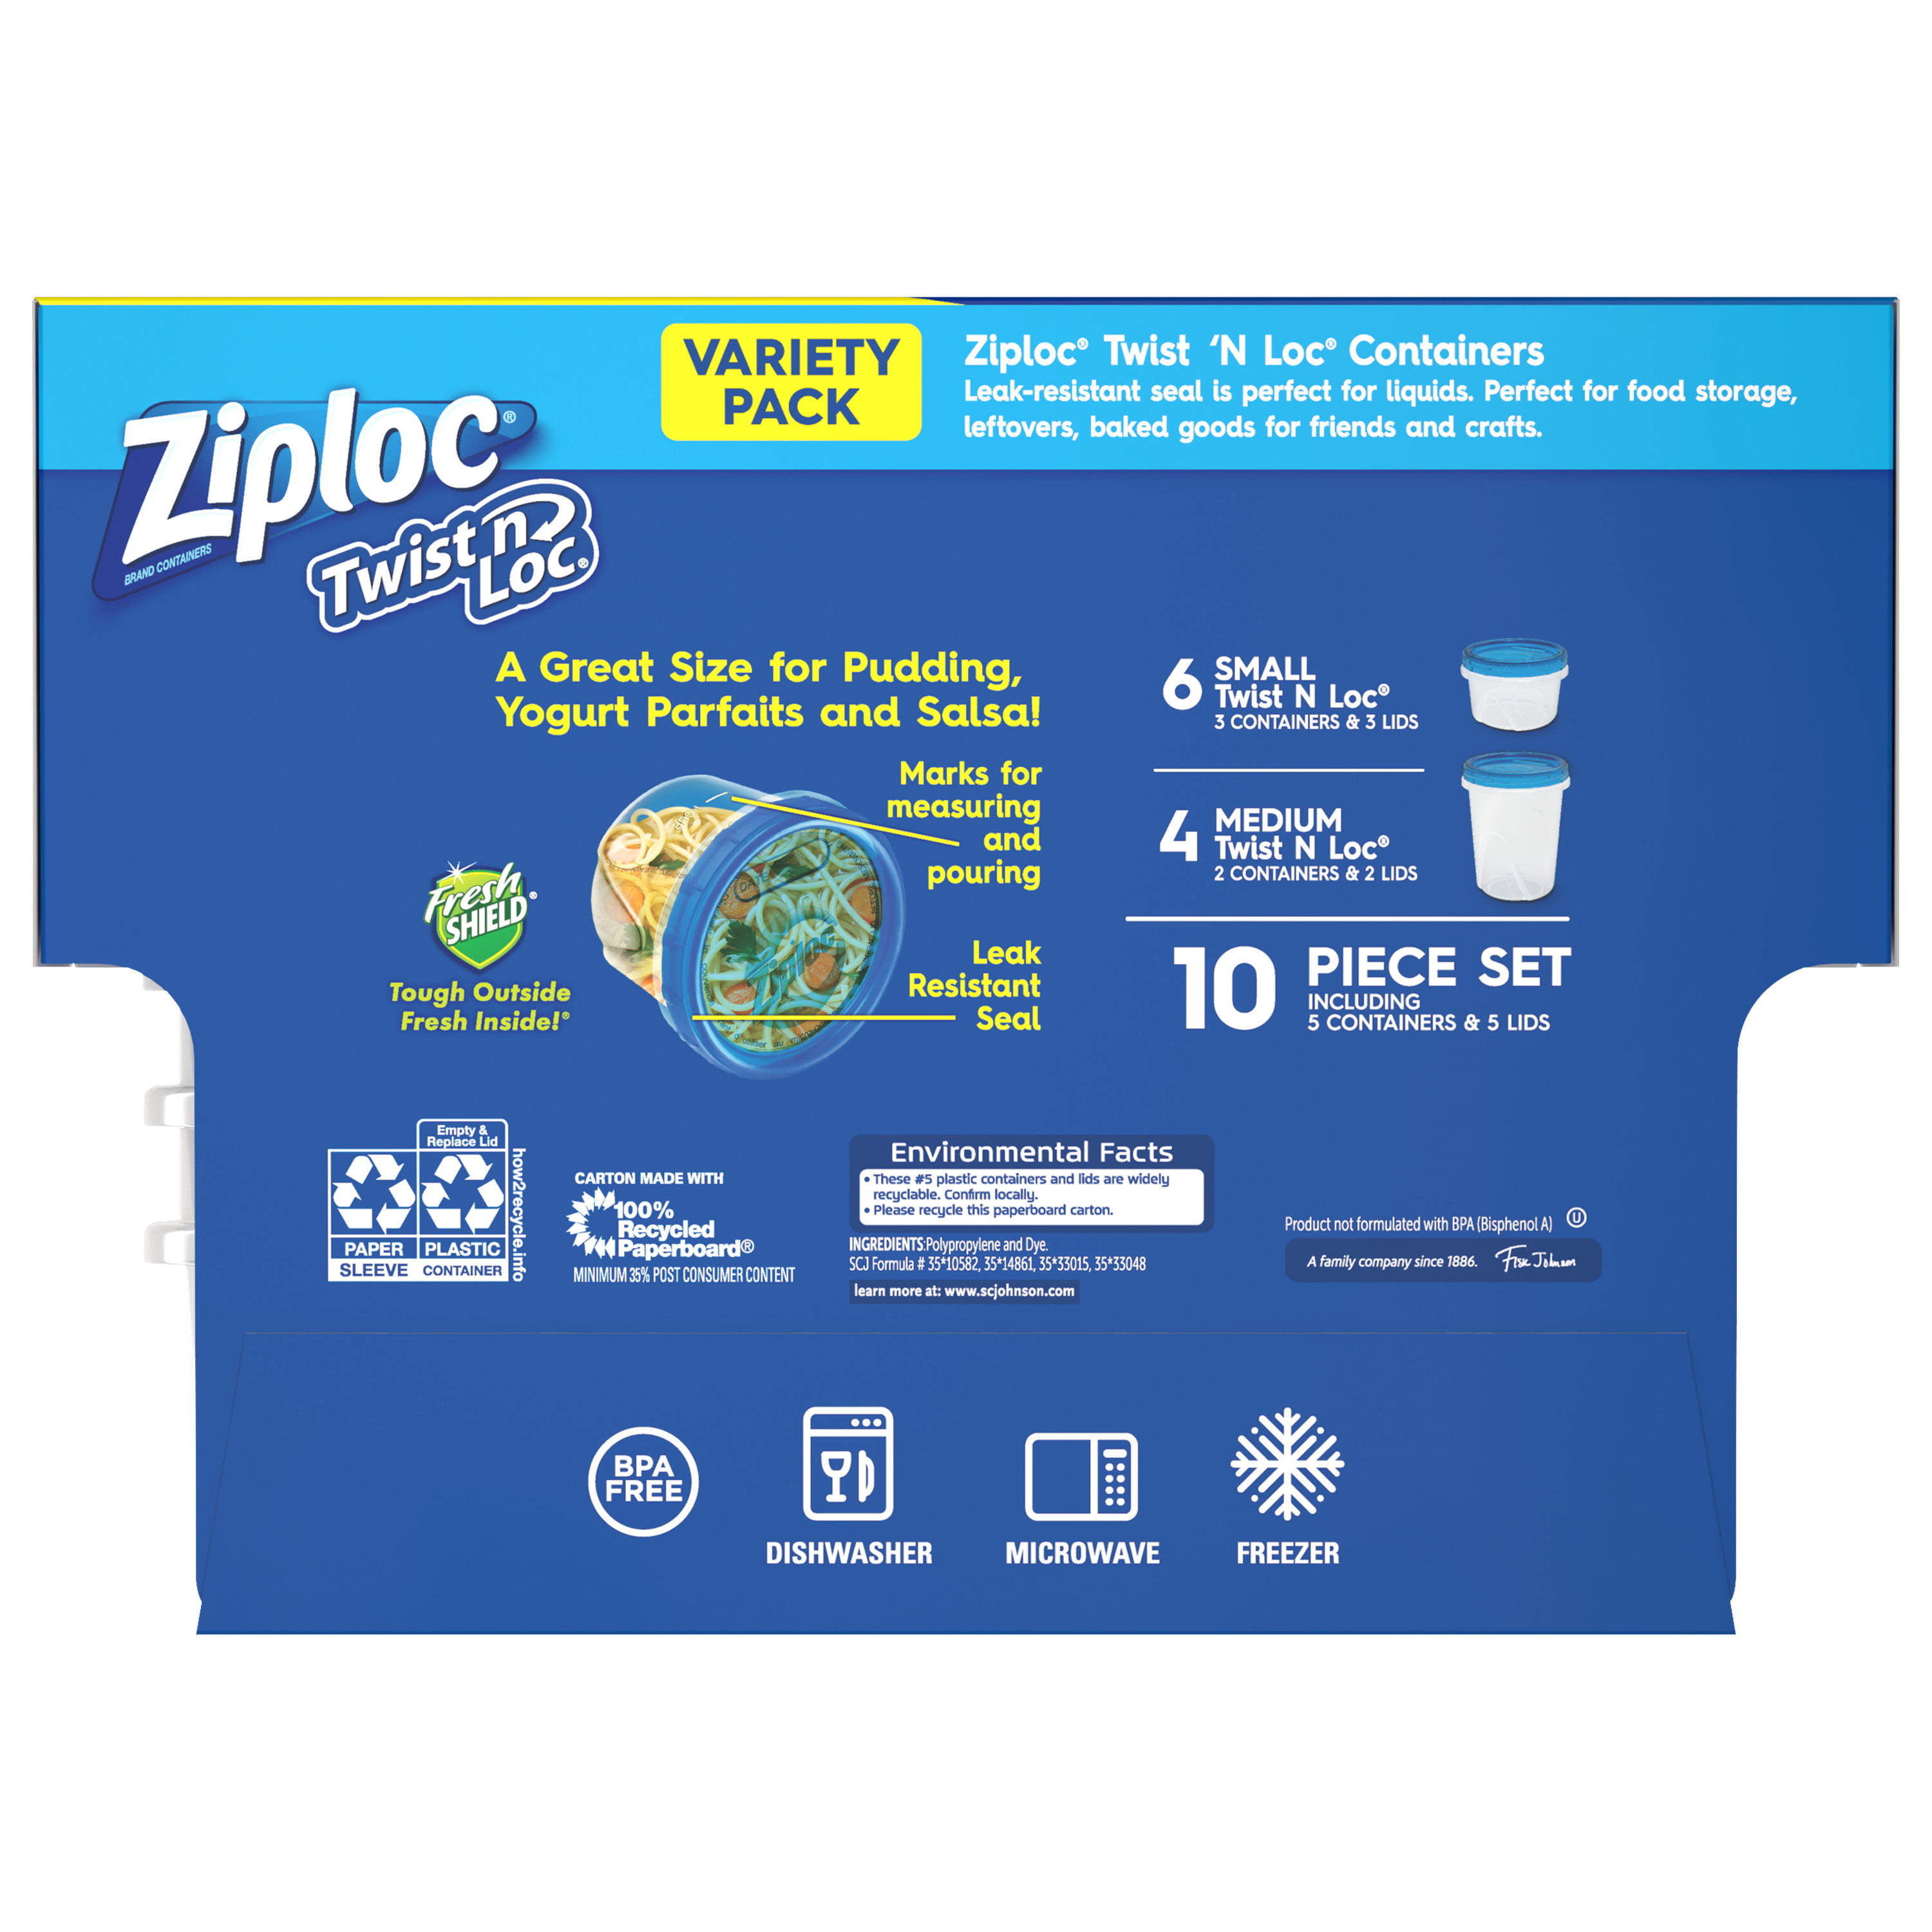 Ziploc Containers: Now Is The Time To Stock Up! - Between Carpools